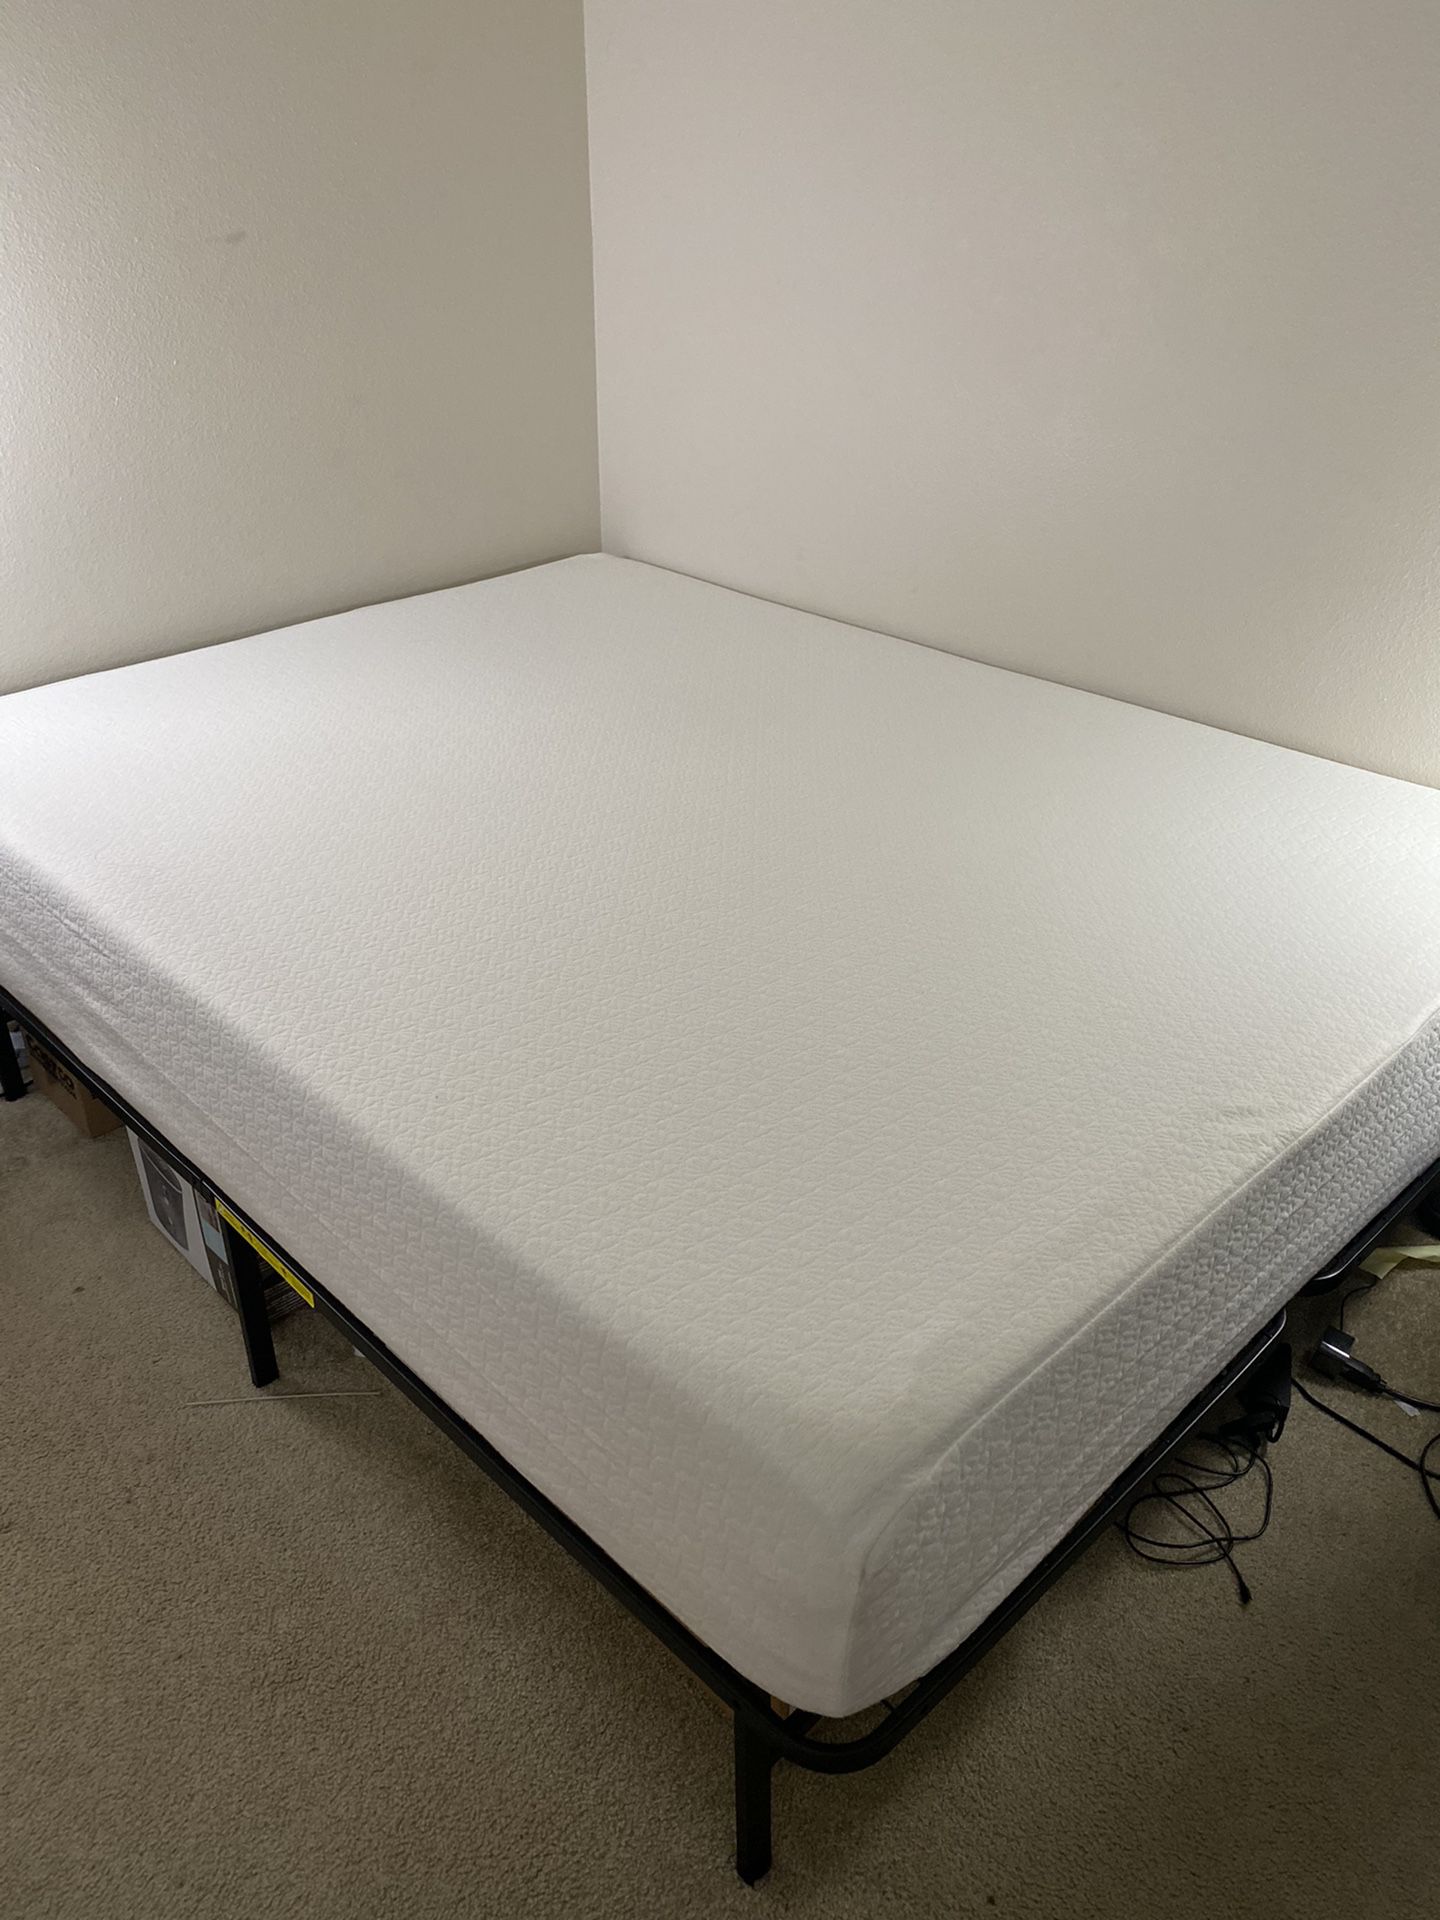 Queen bed frame with 12 inch memory foam mattress and mattress protector